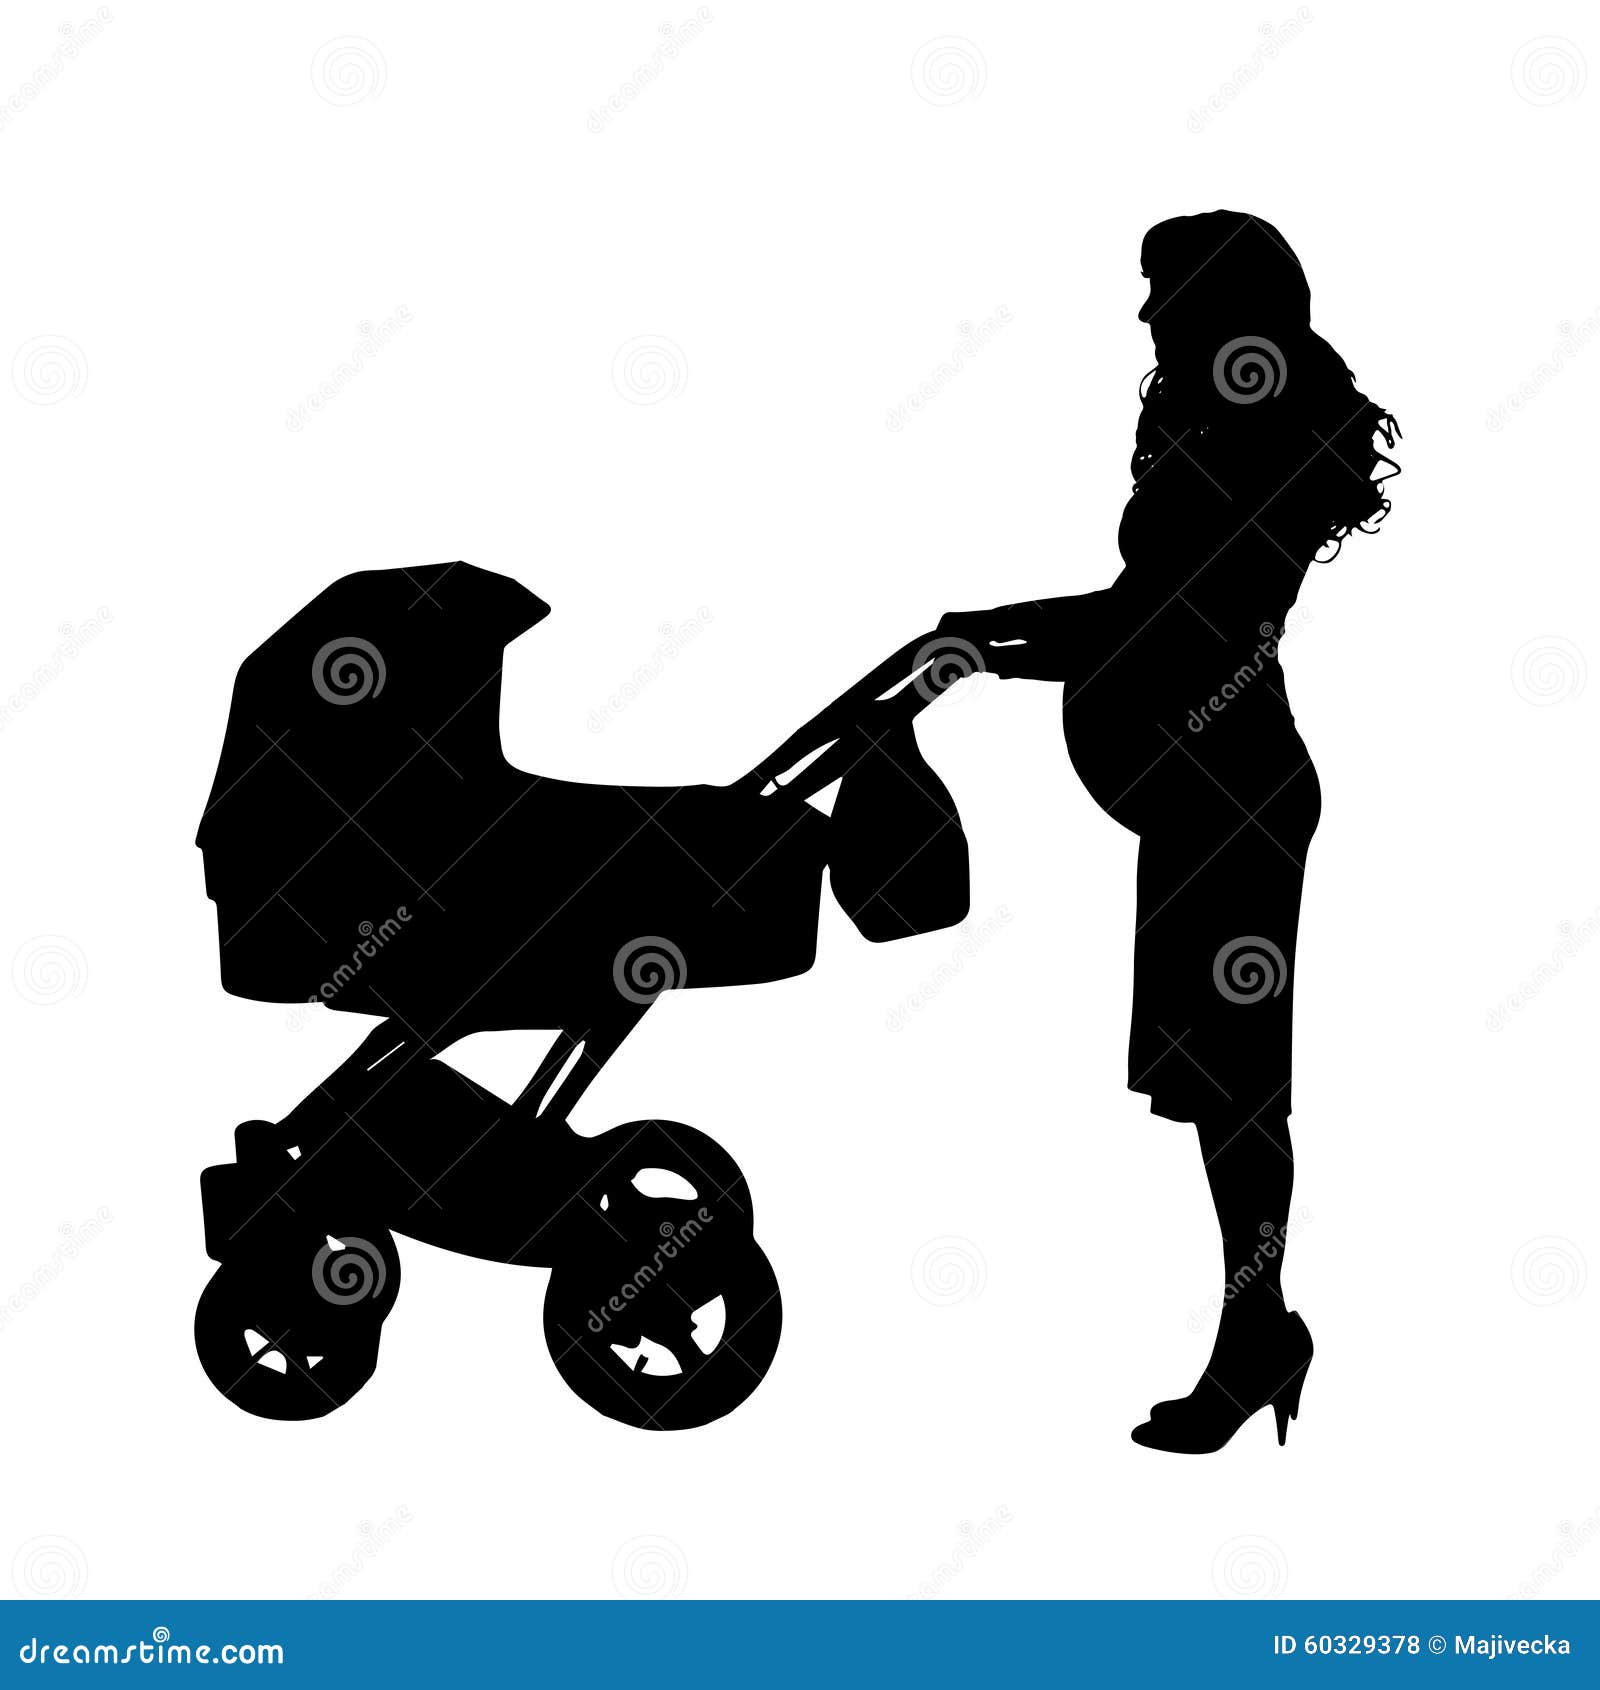 Download Vector Silhouette Of A Pregnant Woman. Stock Vector - Illustration of illustration, health: 60329378